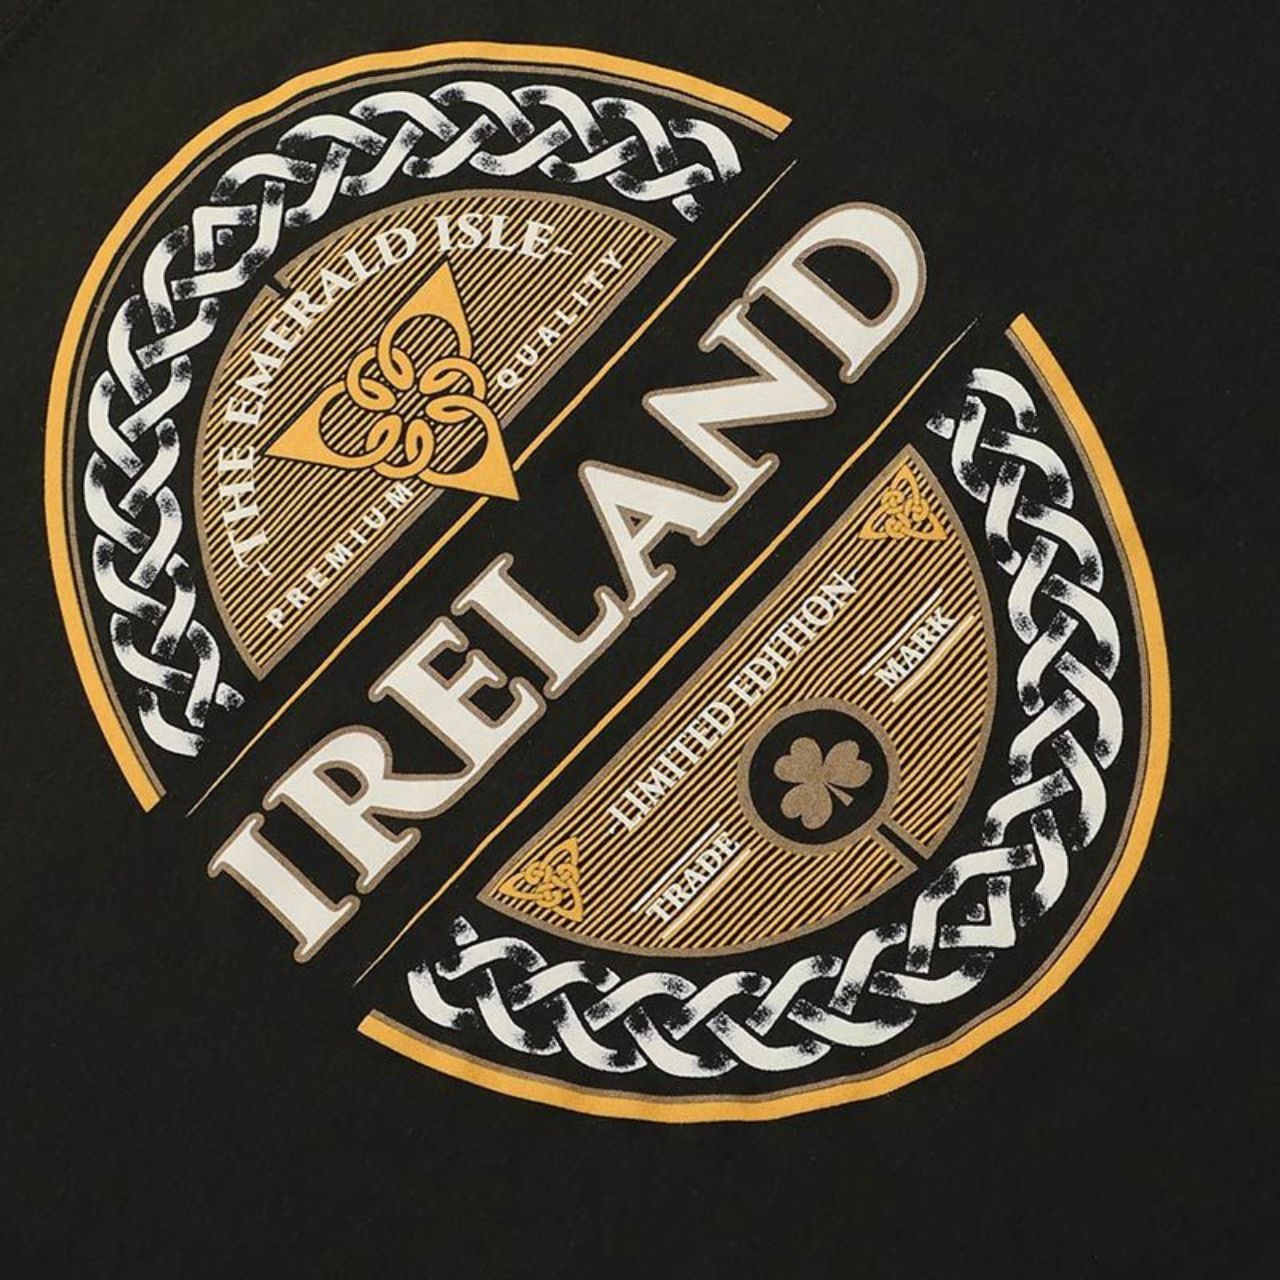 Crafted from 100% cotton, the Ireland Emerald Isle Label T-Shirt is a superb Irish souvenir, boasting a Celtic knot motif and the country's name printed on the front. Designed for maximum comfort and style, it makes for an impeccable gift.